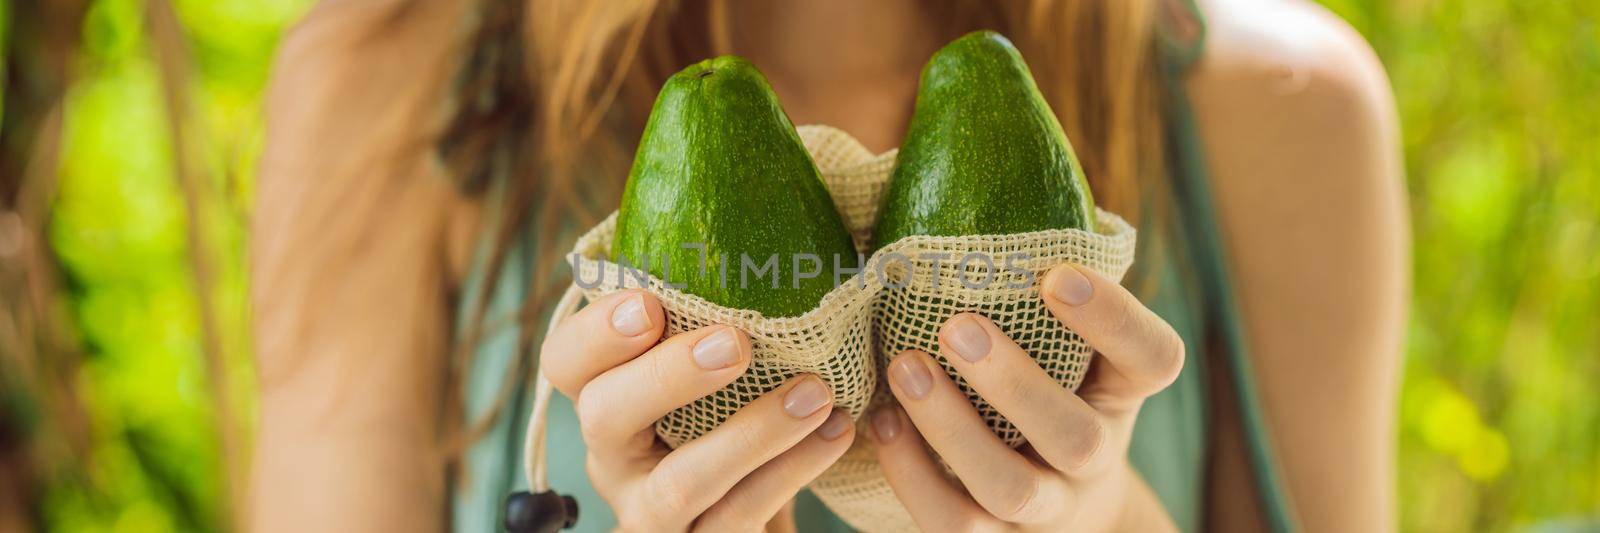 Avocado in a reusable bag in the hands of a young woman. Zero waste concept BANNER, LONG FORMAT by galitskaya